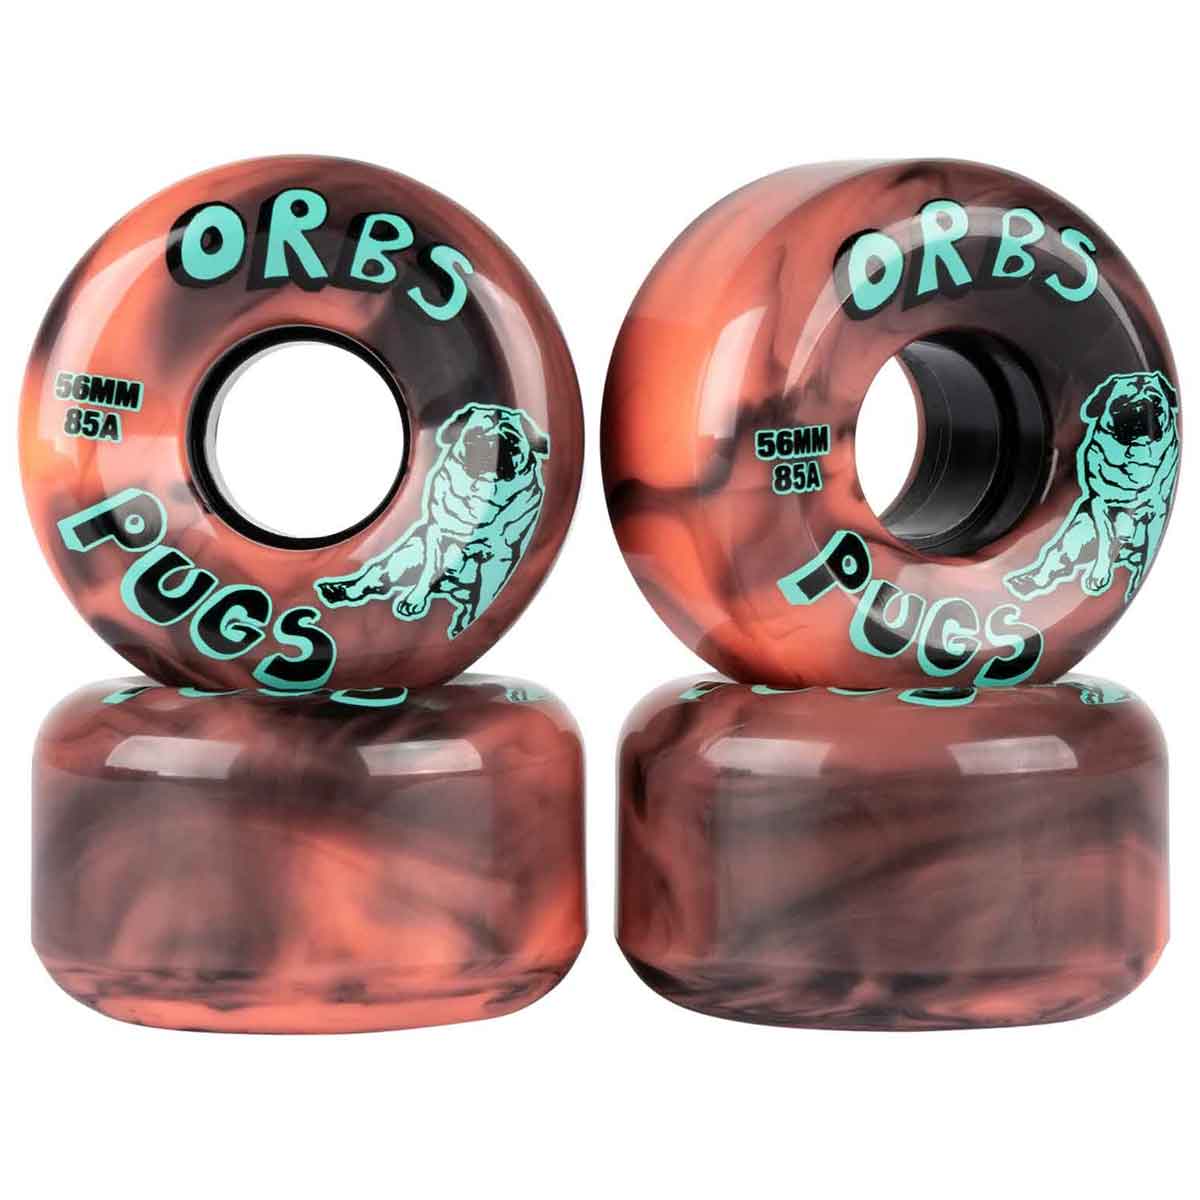 ORBS SKATEBOARD WHEELS CORAL BLACK WHITE 54MM 85A NEW RAD FAST SMOOTH PUGS 